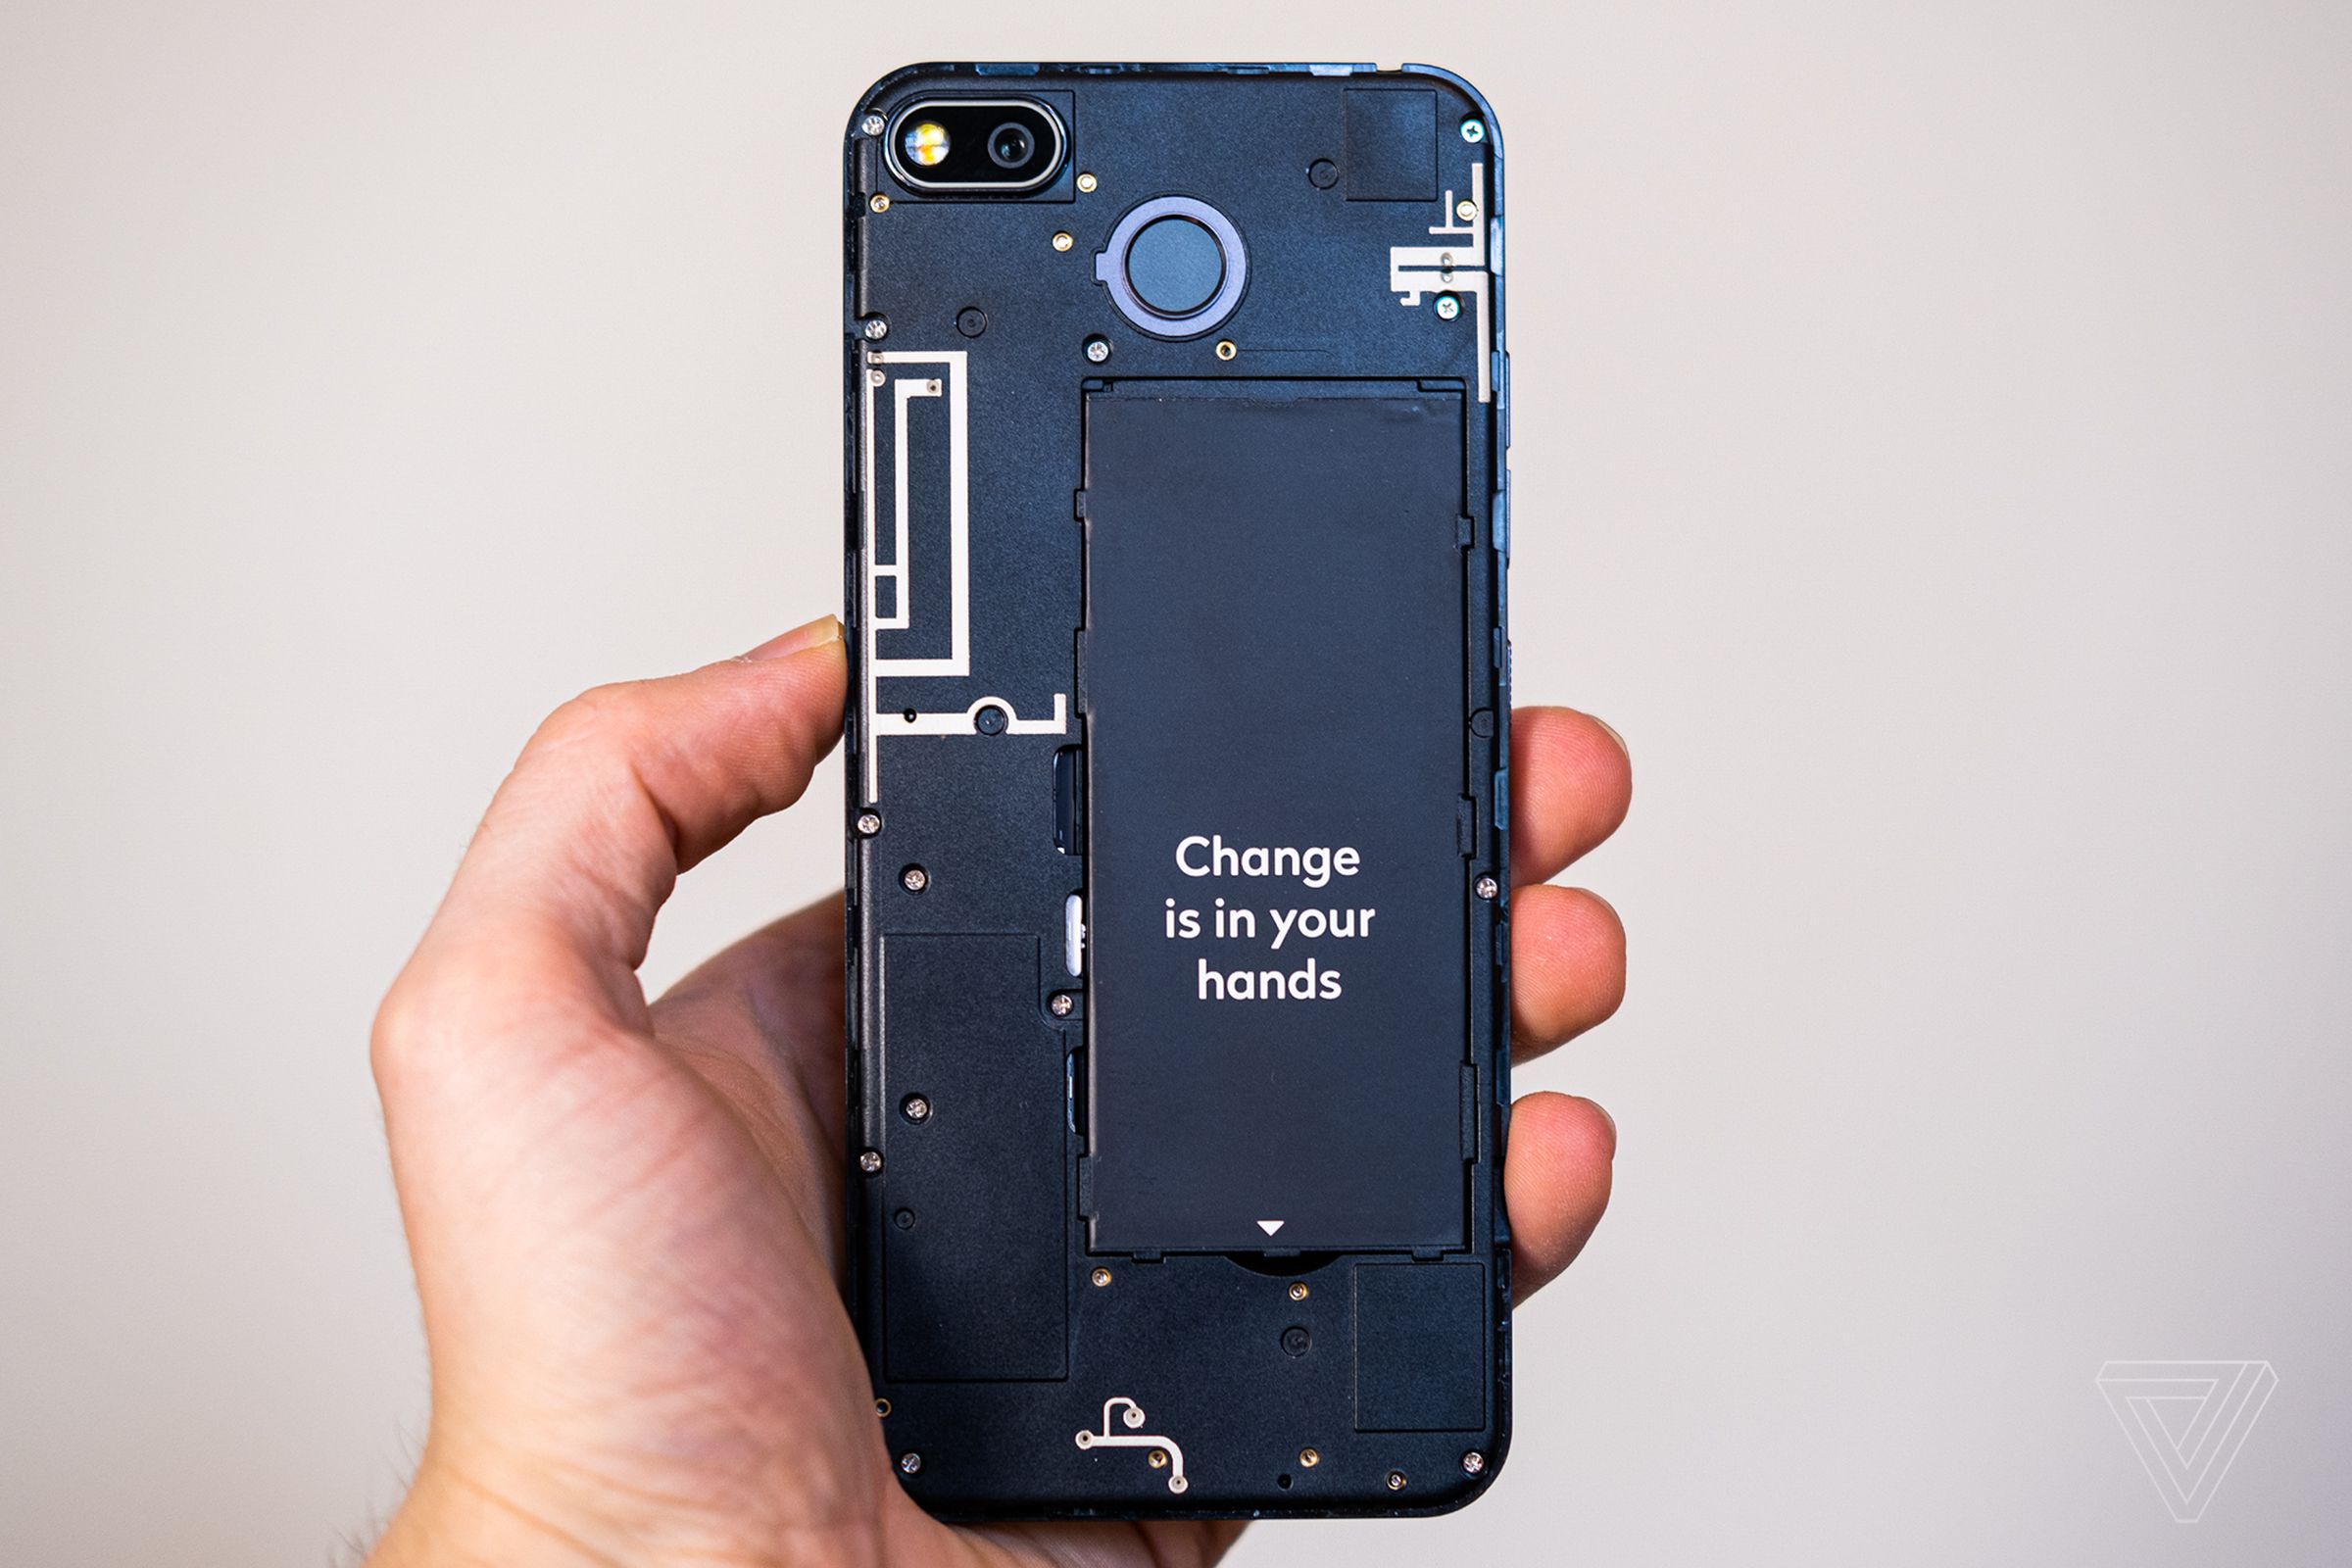 Take off the phone’s back, and you’ll find a removable battery and a set of easily accessible screws.